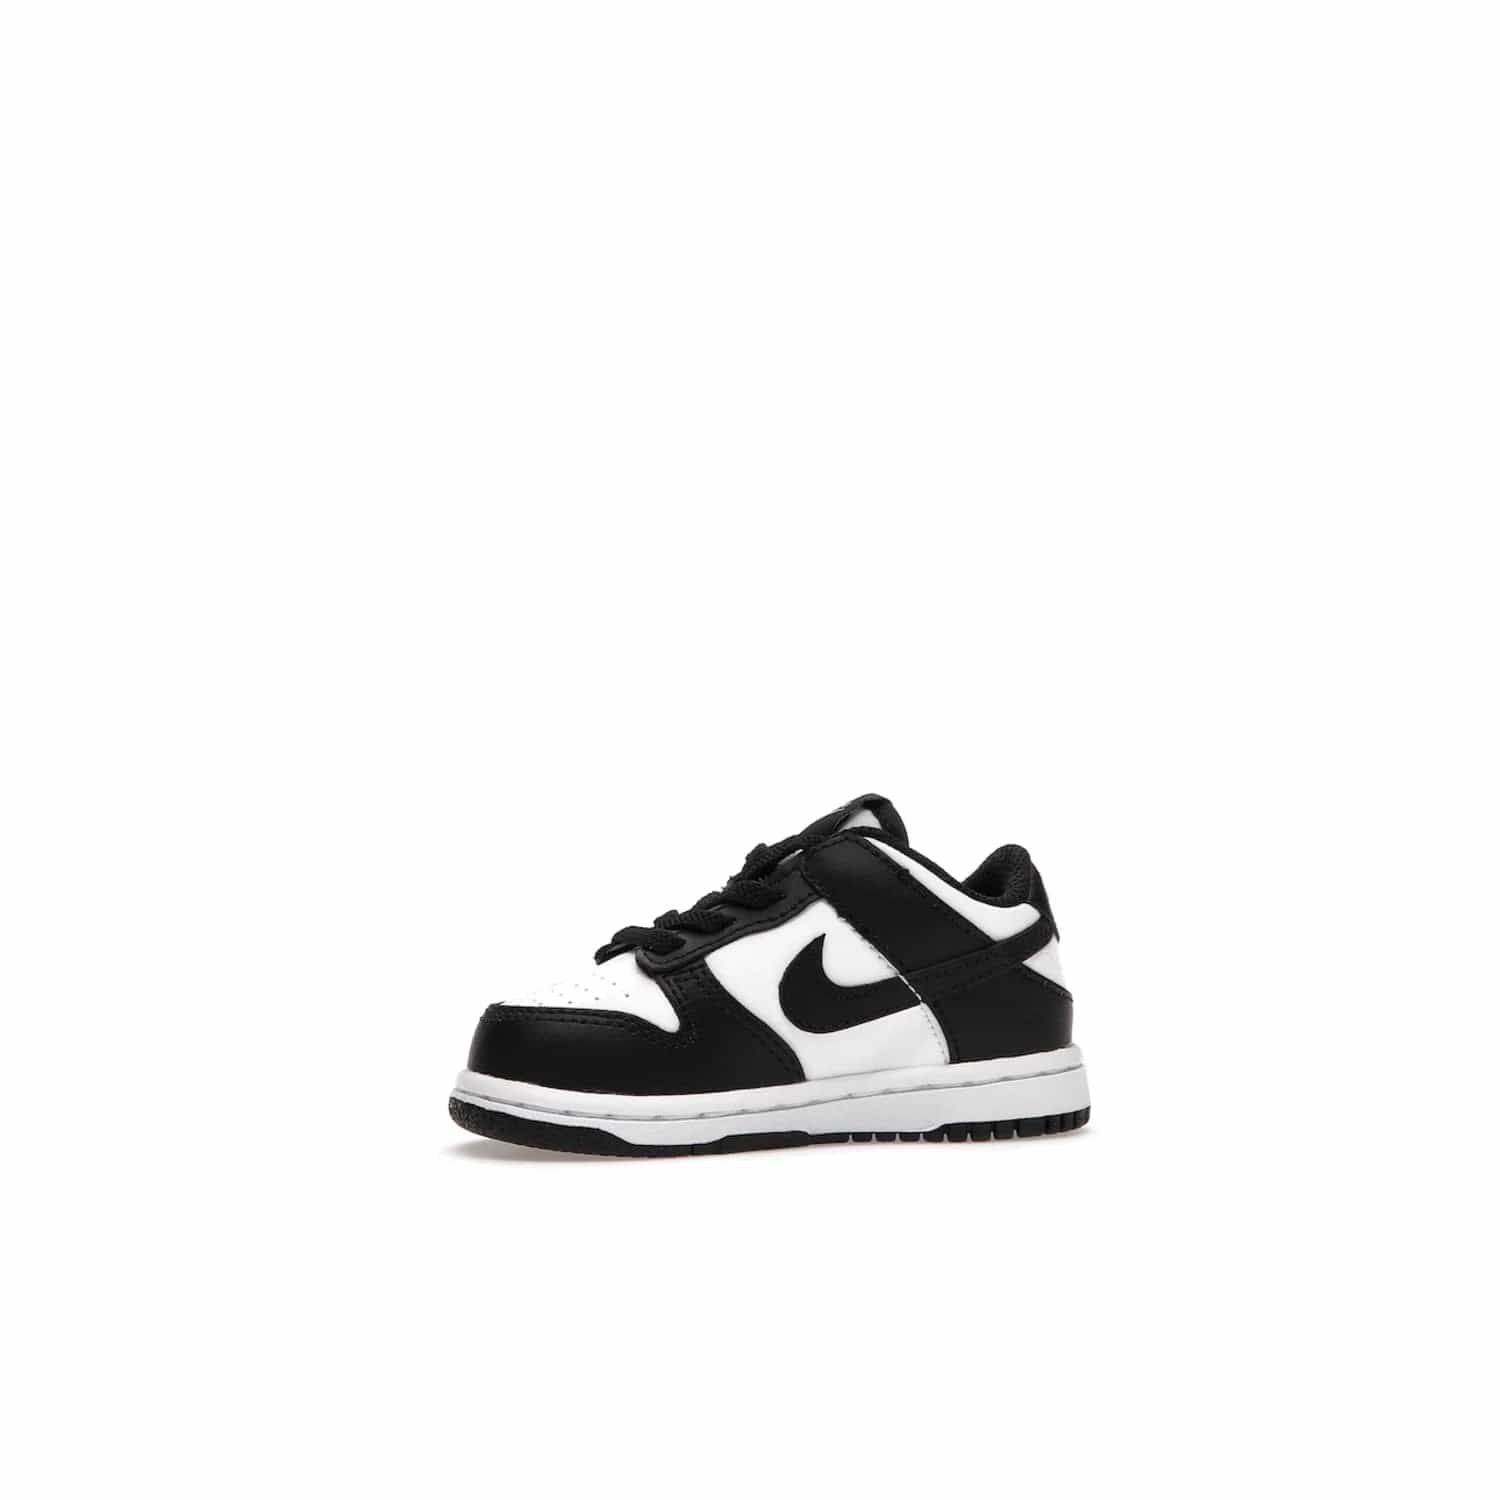 Nike Dunk Low Retro White Black Panda (2021) (TD) - Image 17 - Only at www.BallersClubKickz.com - The perfect blend of classic style and modern style, the Nike Dunk Low Retro White Black (TD) toddler shoe has a soft leather upper, white midsole, and black outsole. Signature Swoosh branding and lightly padded tongue give it timeless Nike style. Released in March 2021.